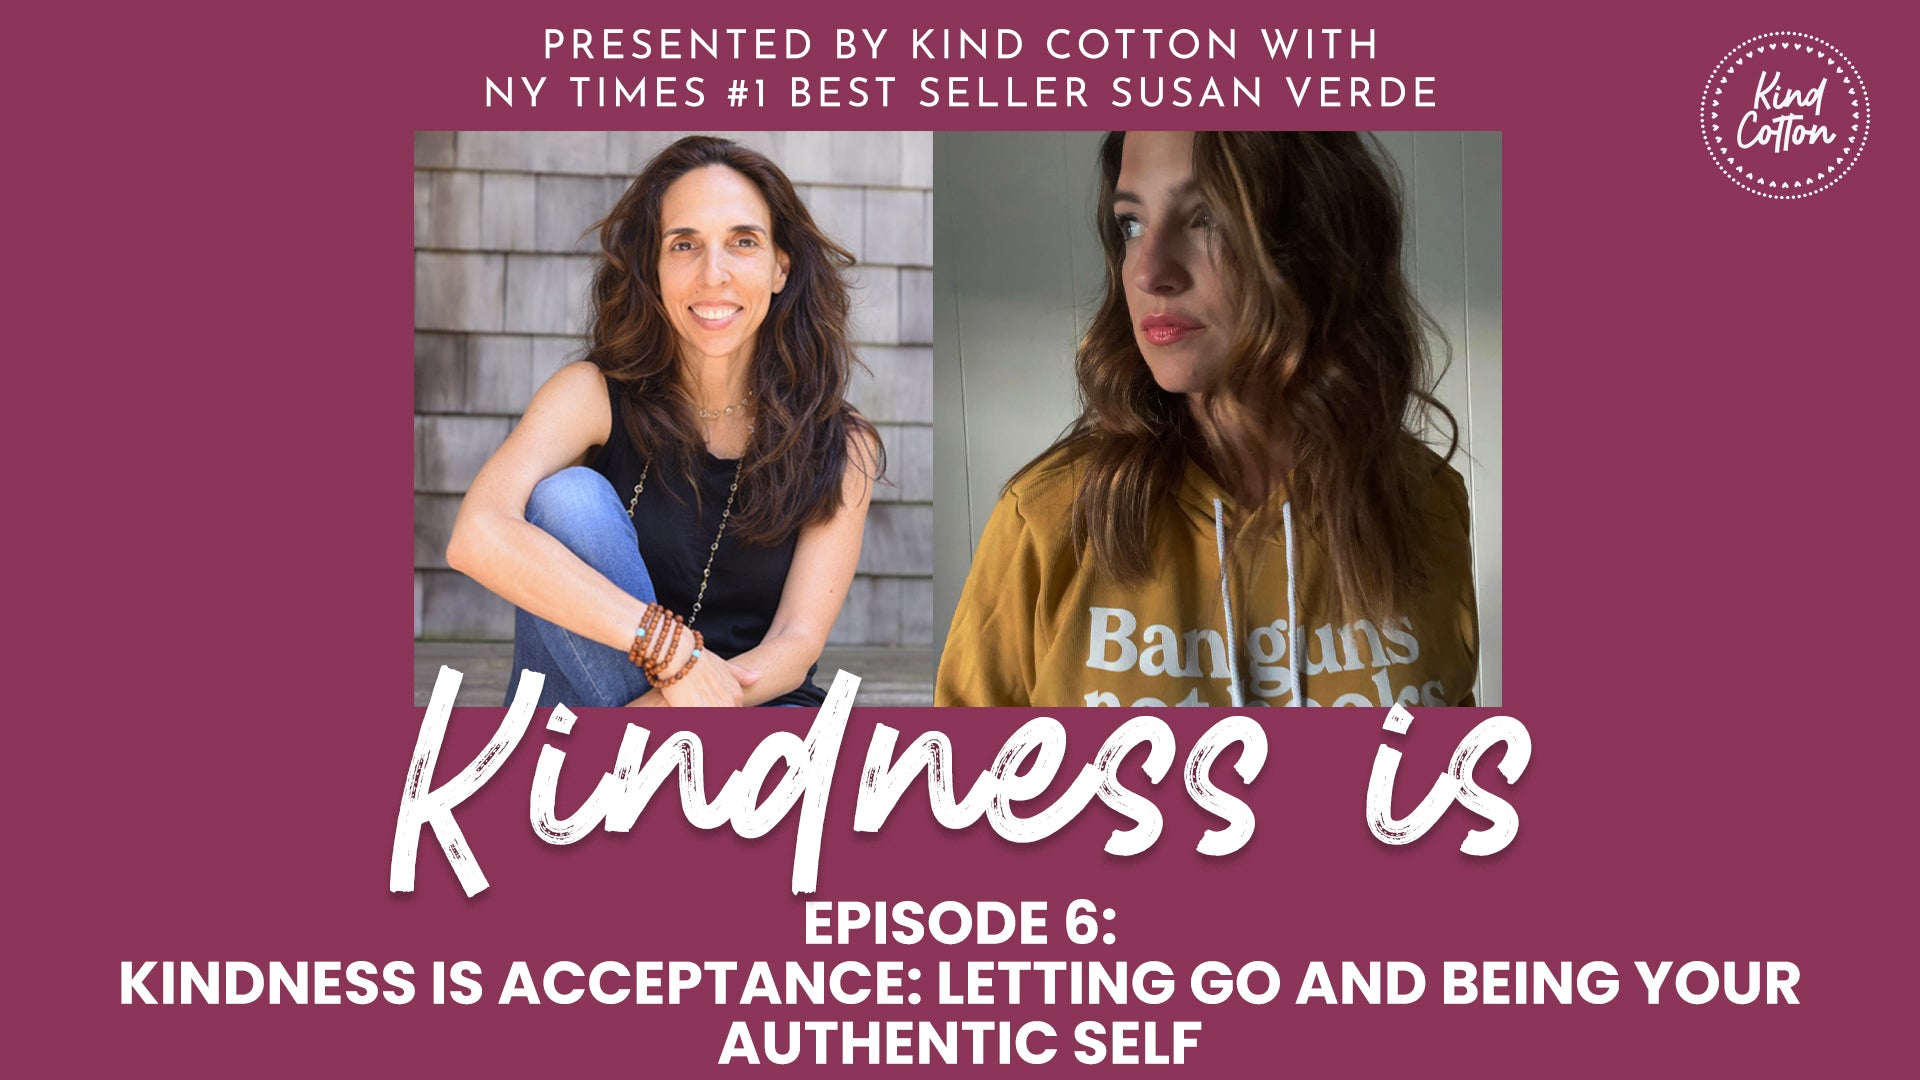 Kindness is Acceptance: Letting go and being your authentic self with New York Times best selling author Susan Verde